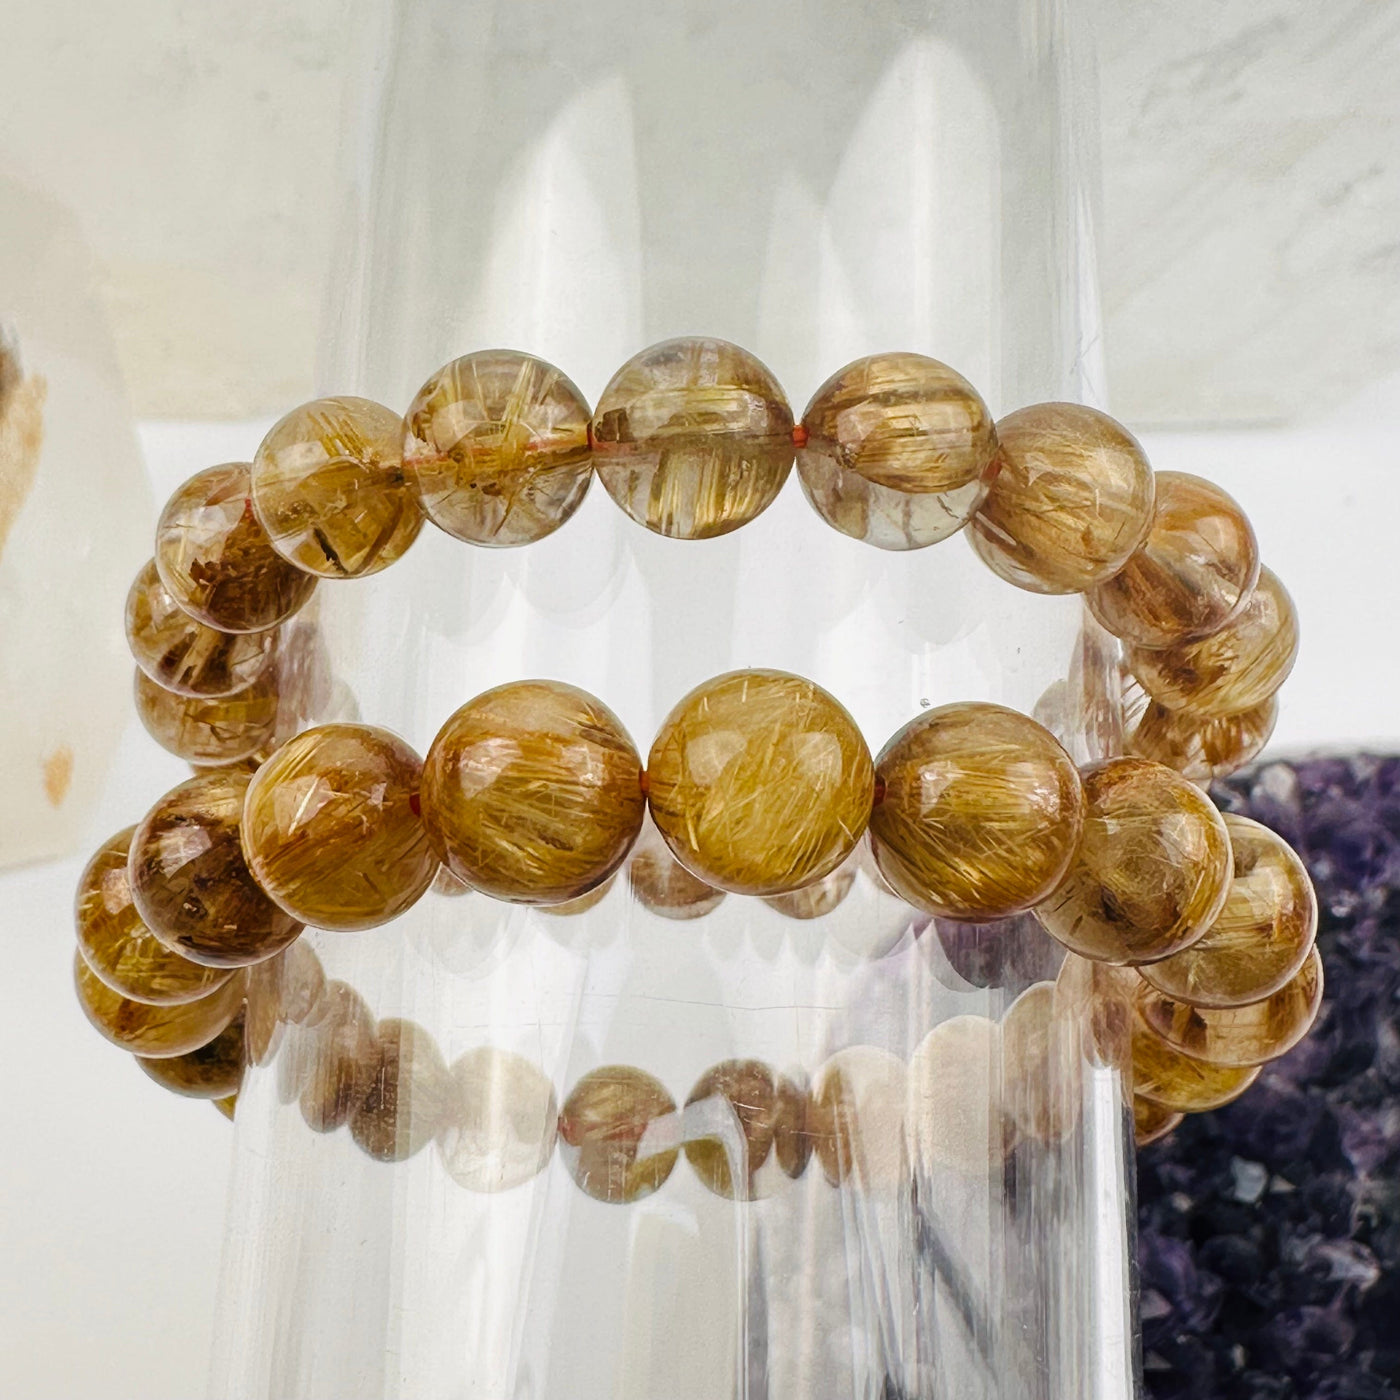 Gold Rutilated Round Bead Bracelets displayed next to each other to show the differences in the color shades 